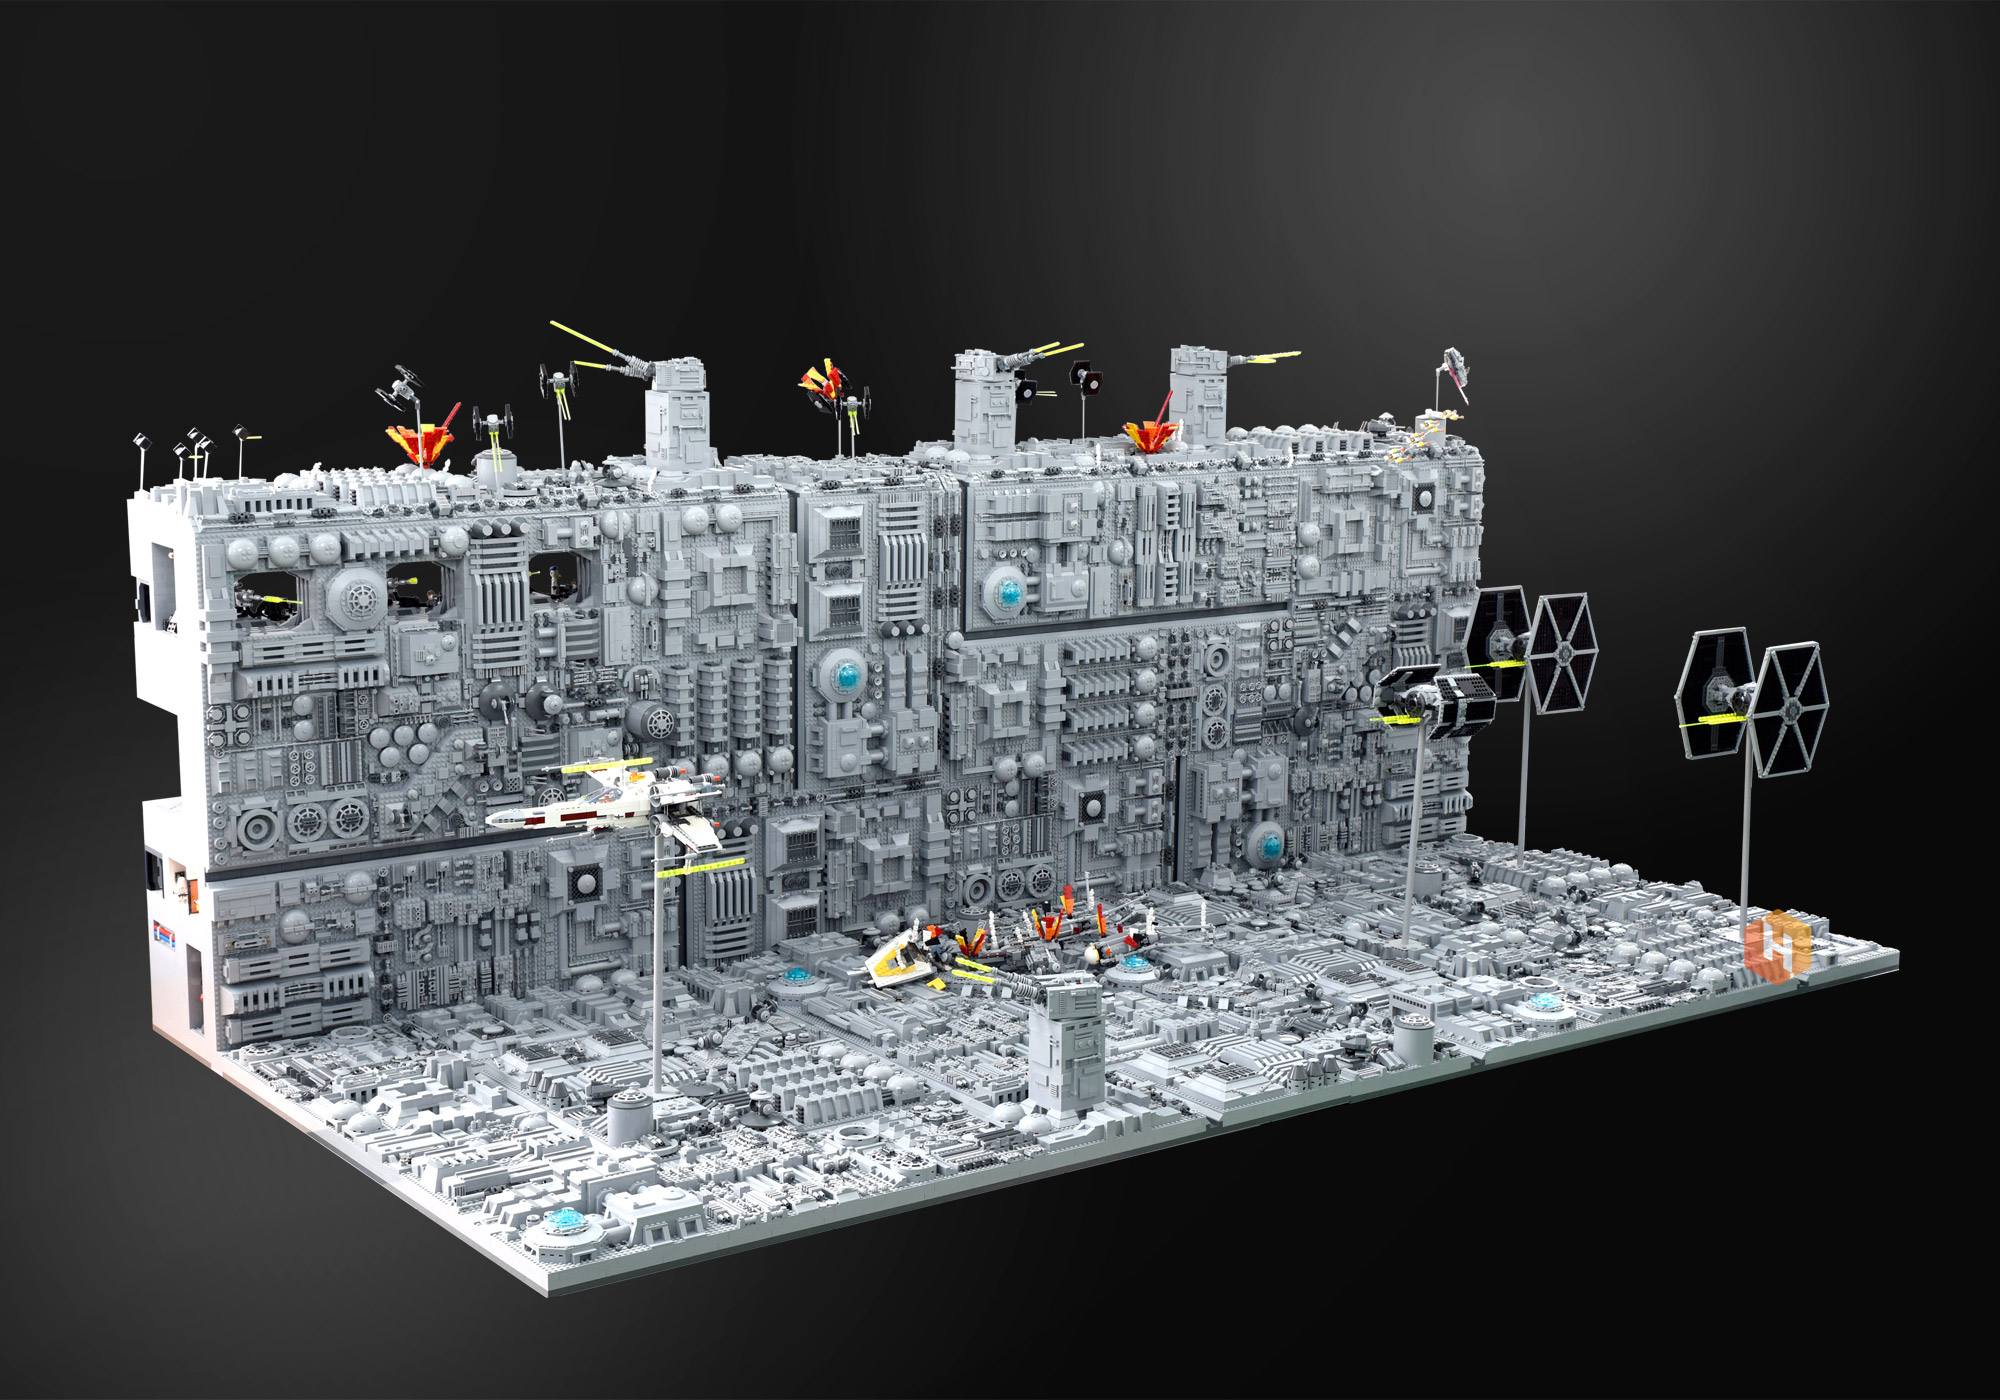 Super Detailed and Huge LEGO Diorama of The STAR WARS Death Star